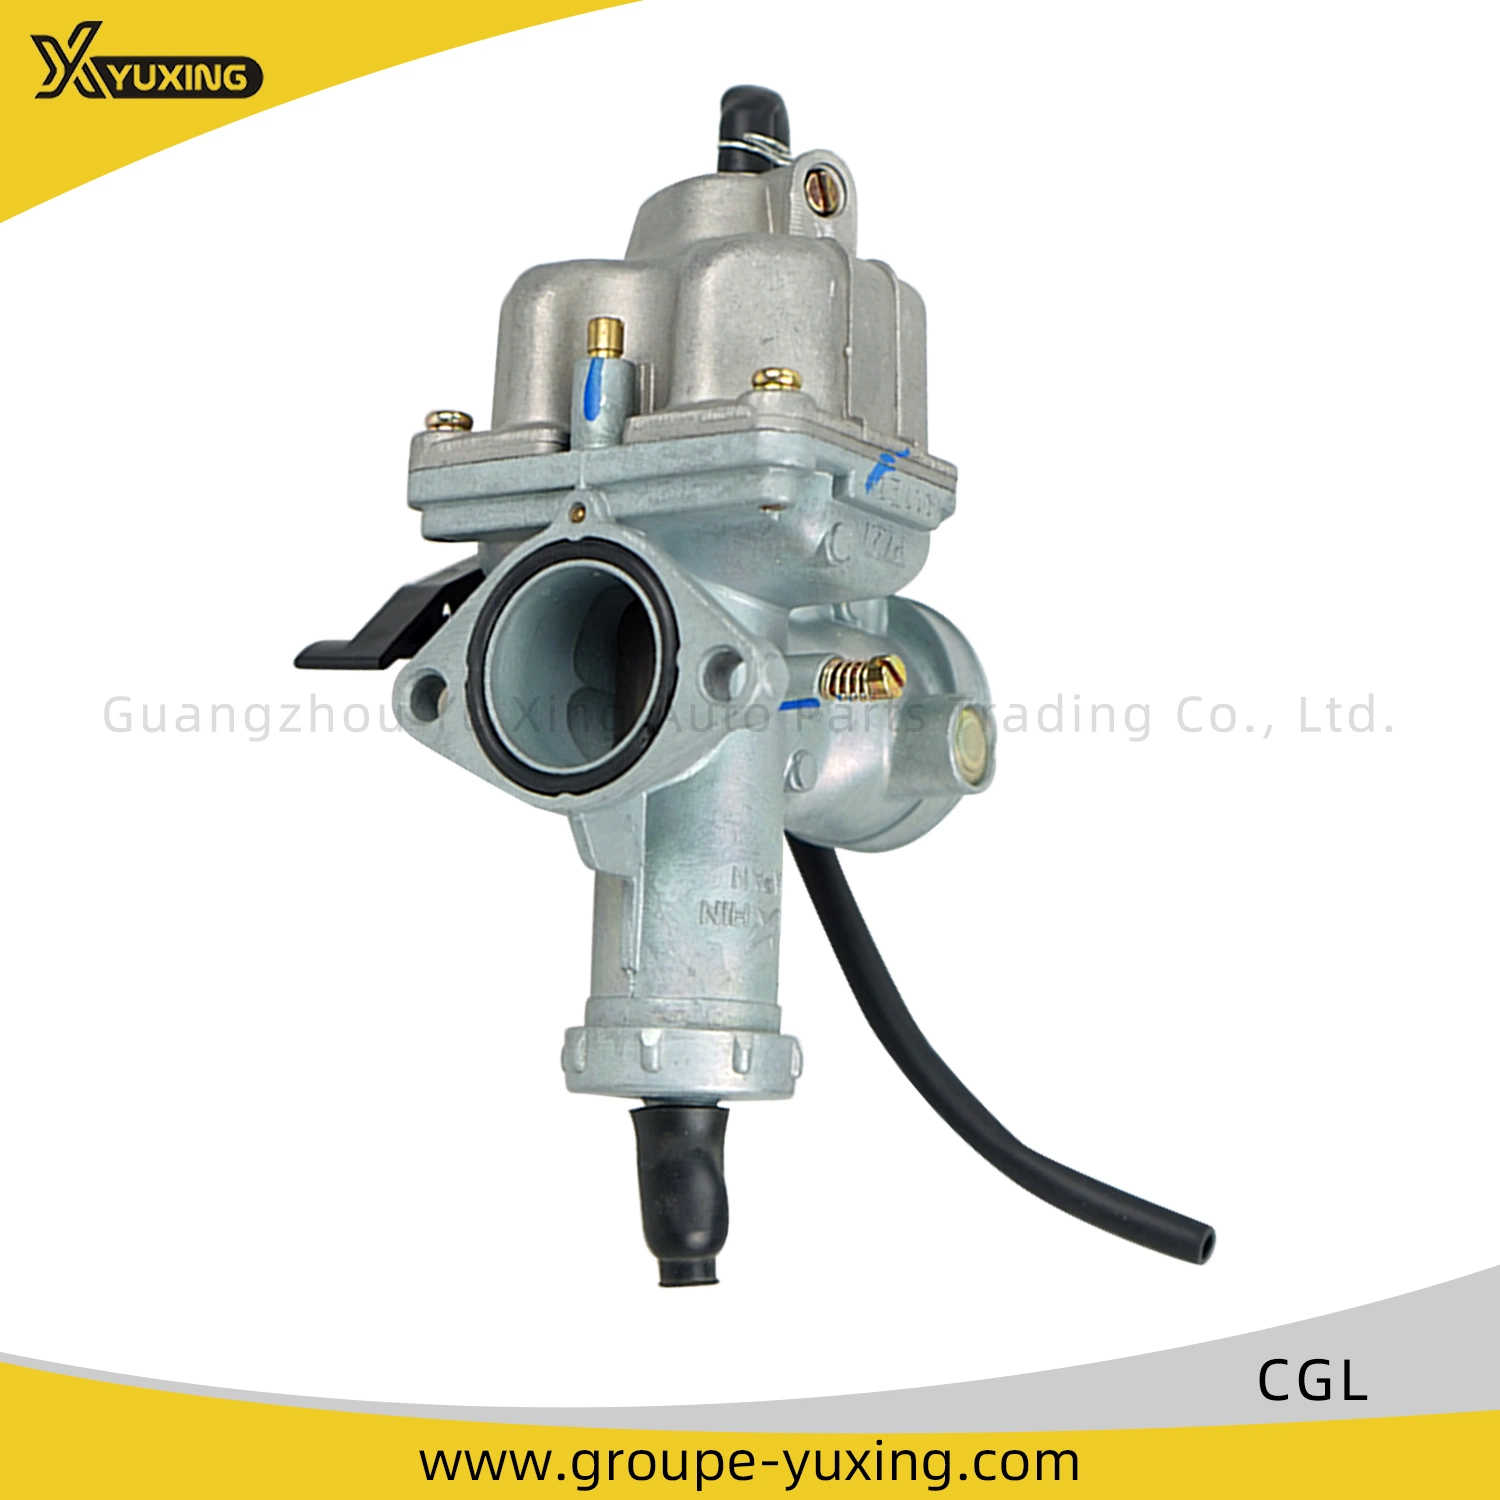 China Motorcycle Accessories Spare Parts Motorcycle Carburetor for Cgl Motorbike